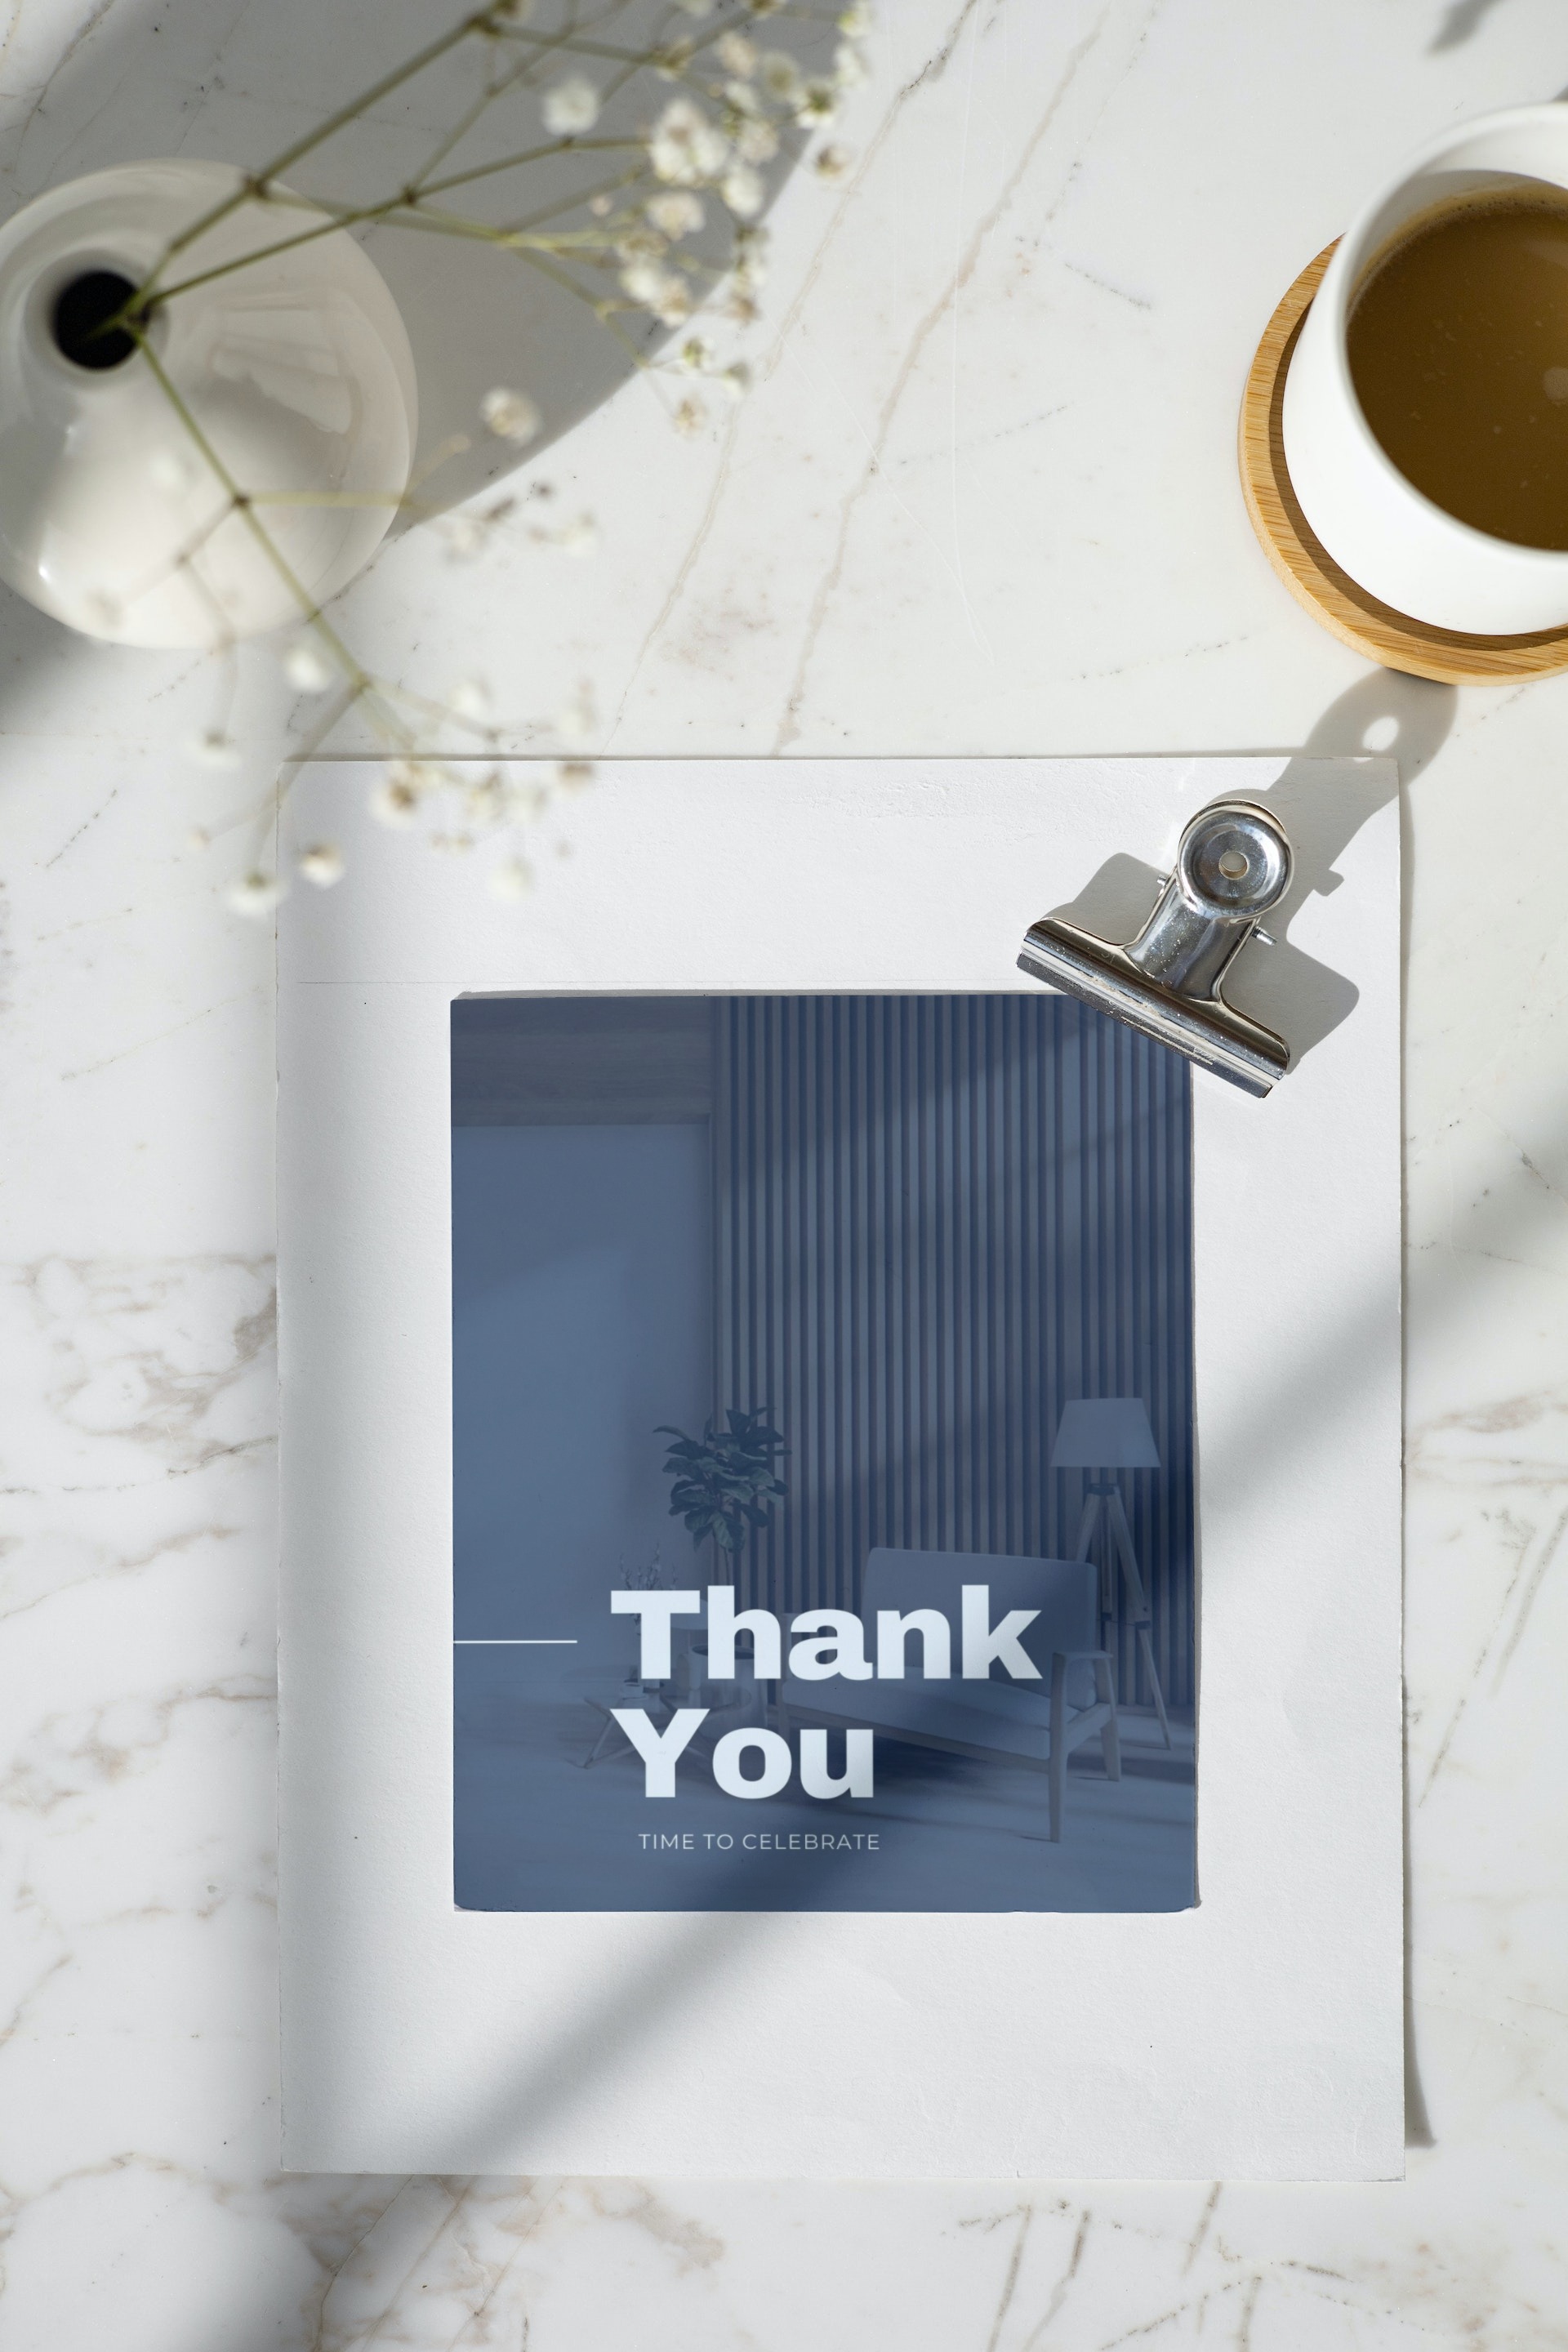 Realtor Thank You Card After Closing - Design 4 (with greeting)